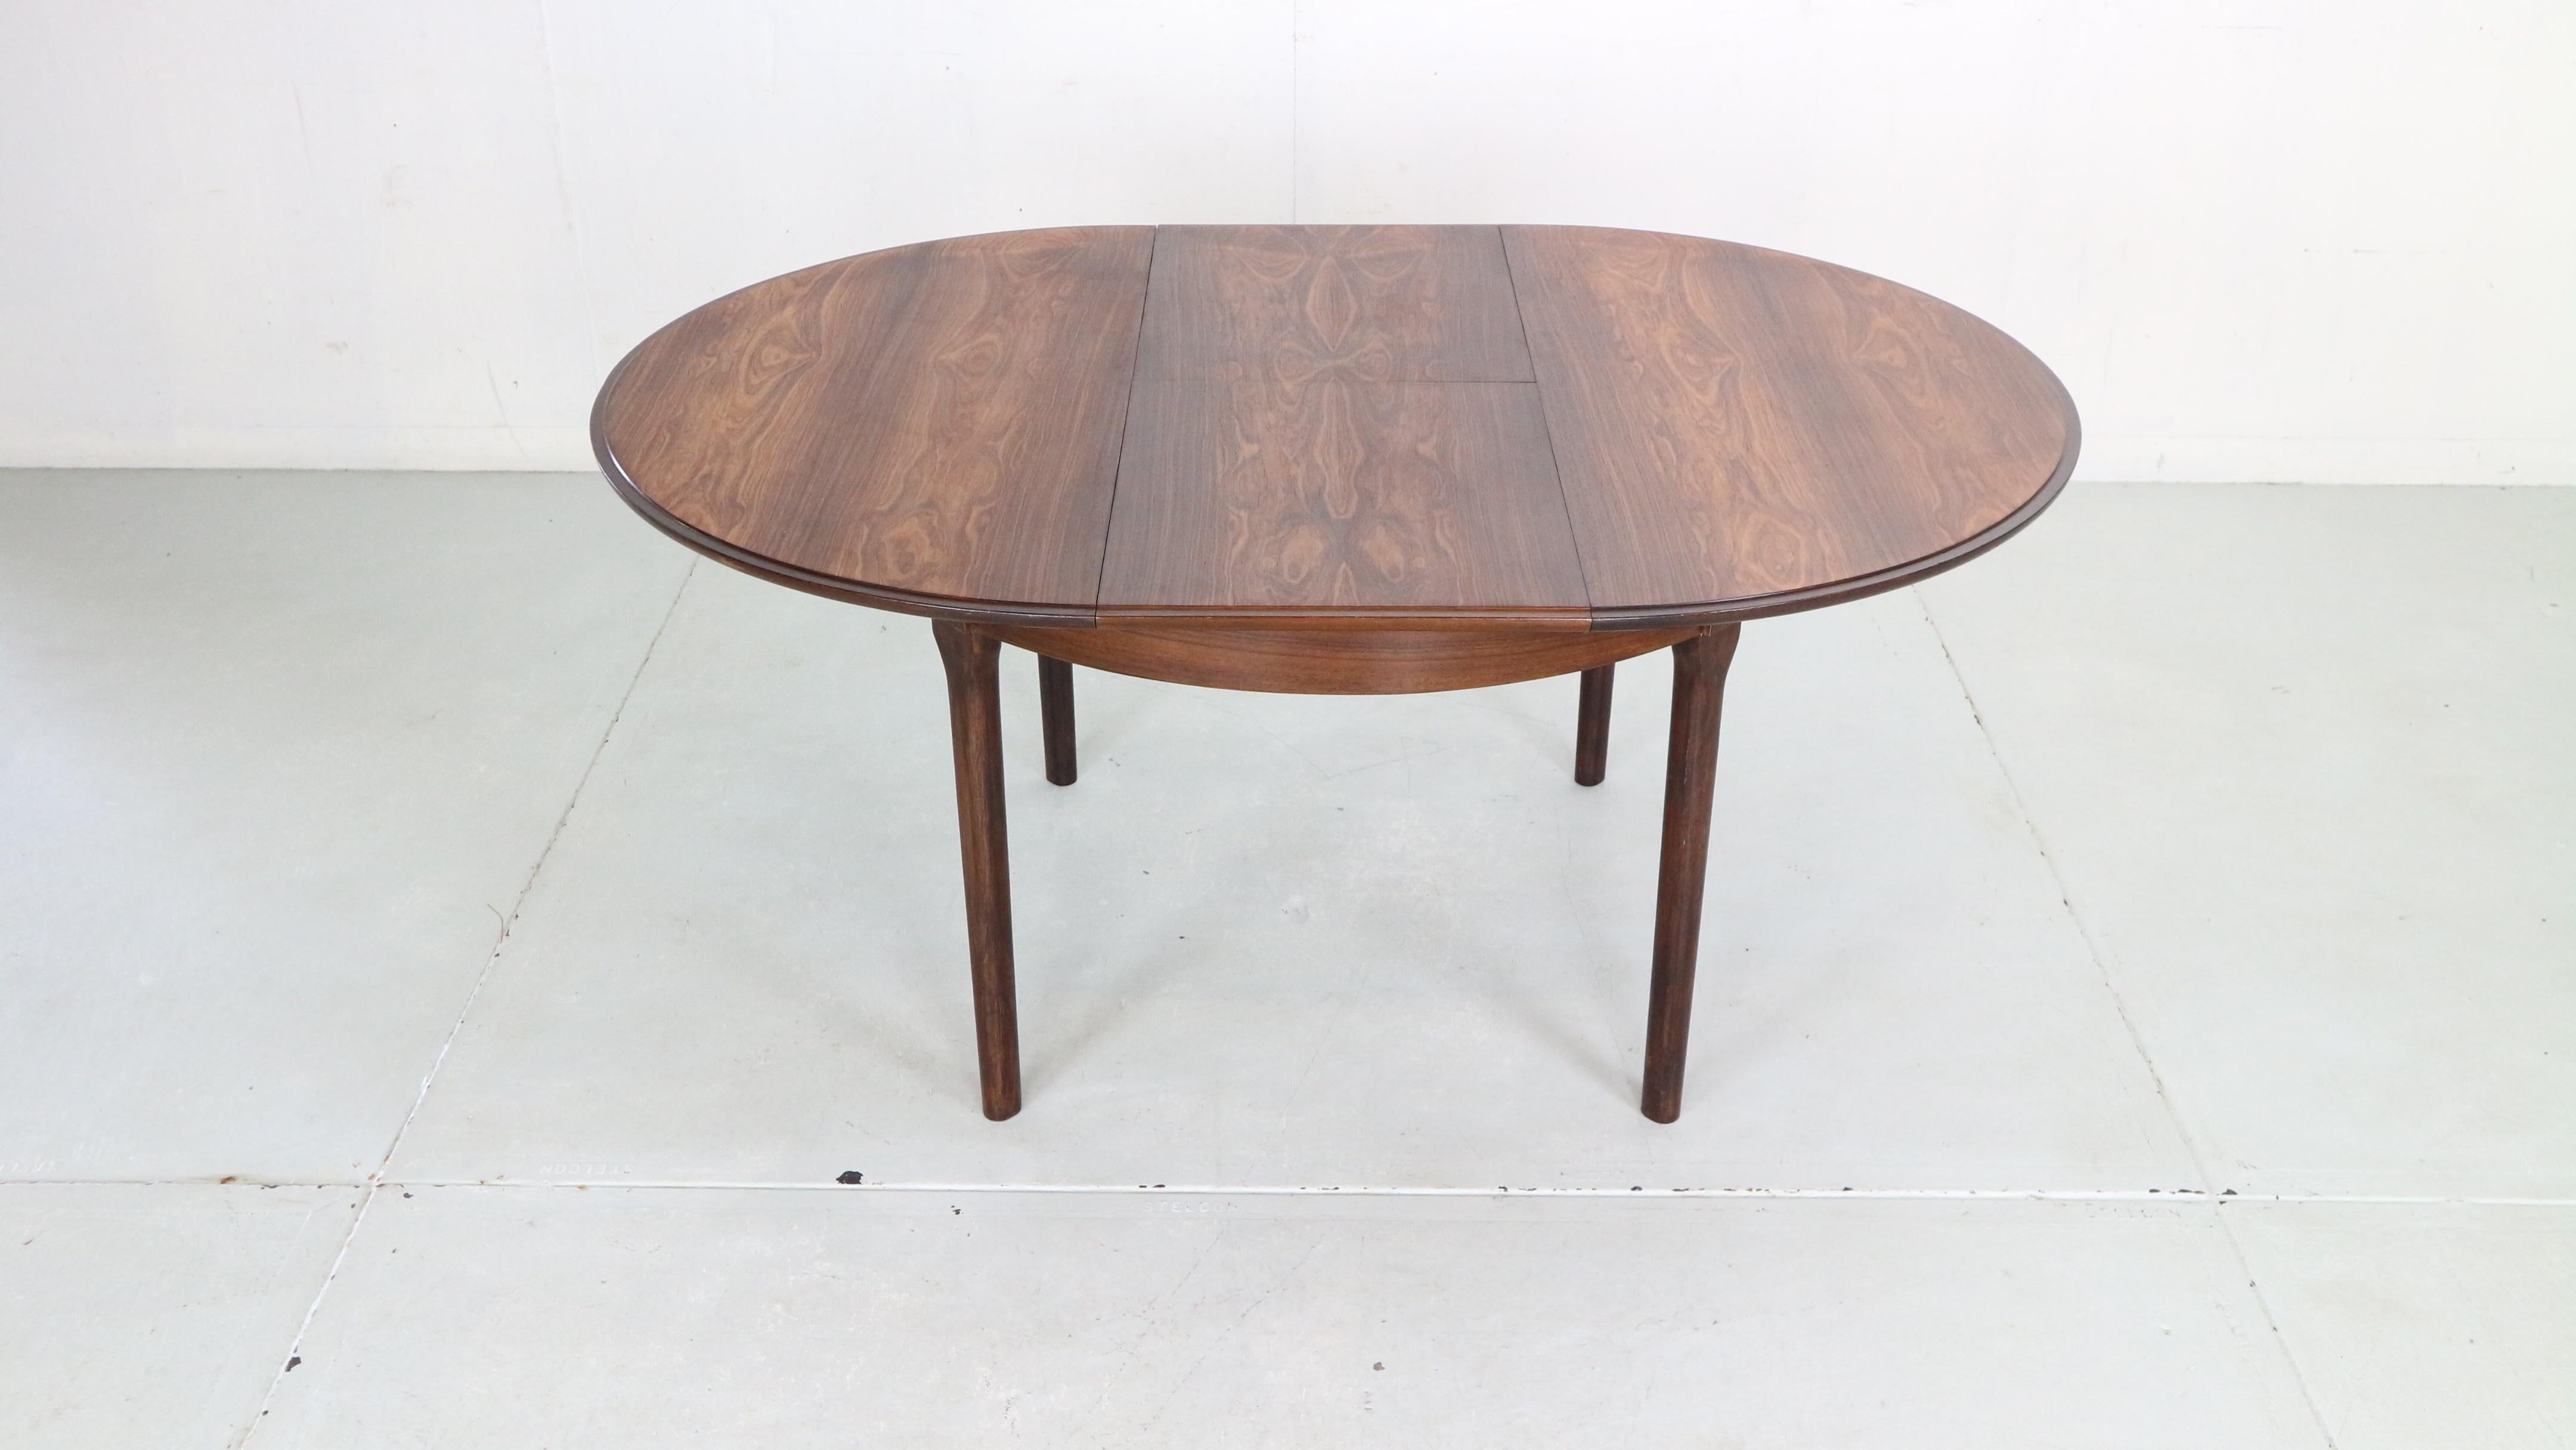 Scandinavian Modern period extendable dining table made in 1960s period, Denmark.
Stunning dining table has an elegant table feet and beautiful wooden pattern round and oval (then extended) tabletop.
This table is extendable from 118cm -